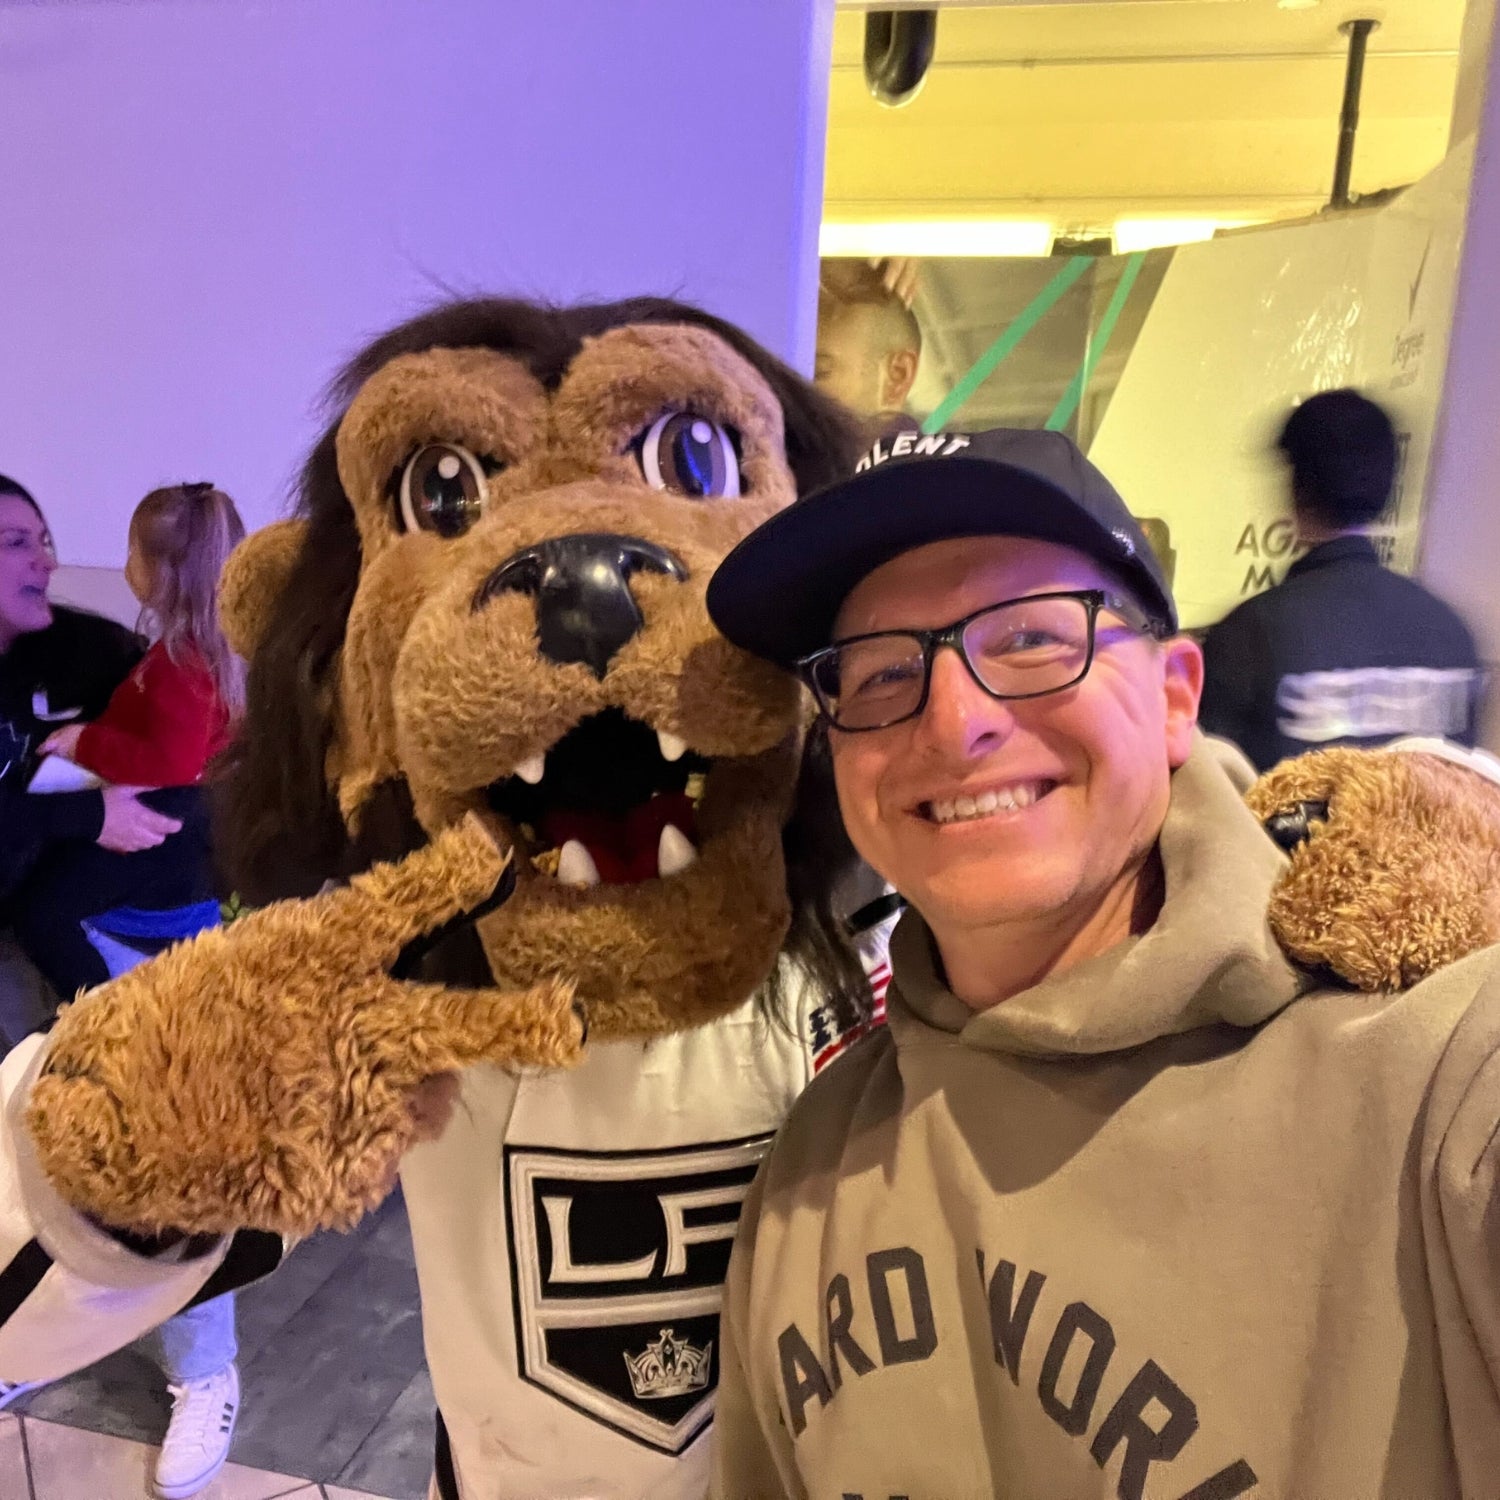 We sent some of the crew out to Toronto a few weeks ago to check out the NHL All Star game for some work and play. Safe to say the trip did not disappoint! Delseyfly metoparis's very own "dad" reflects back on his trip to share some of the highlights. Check it out!